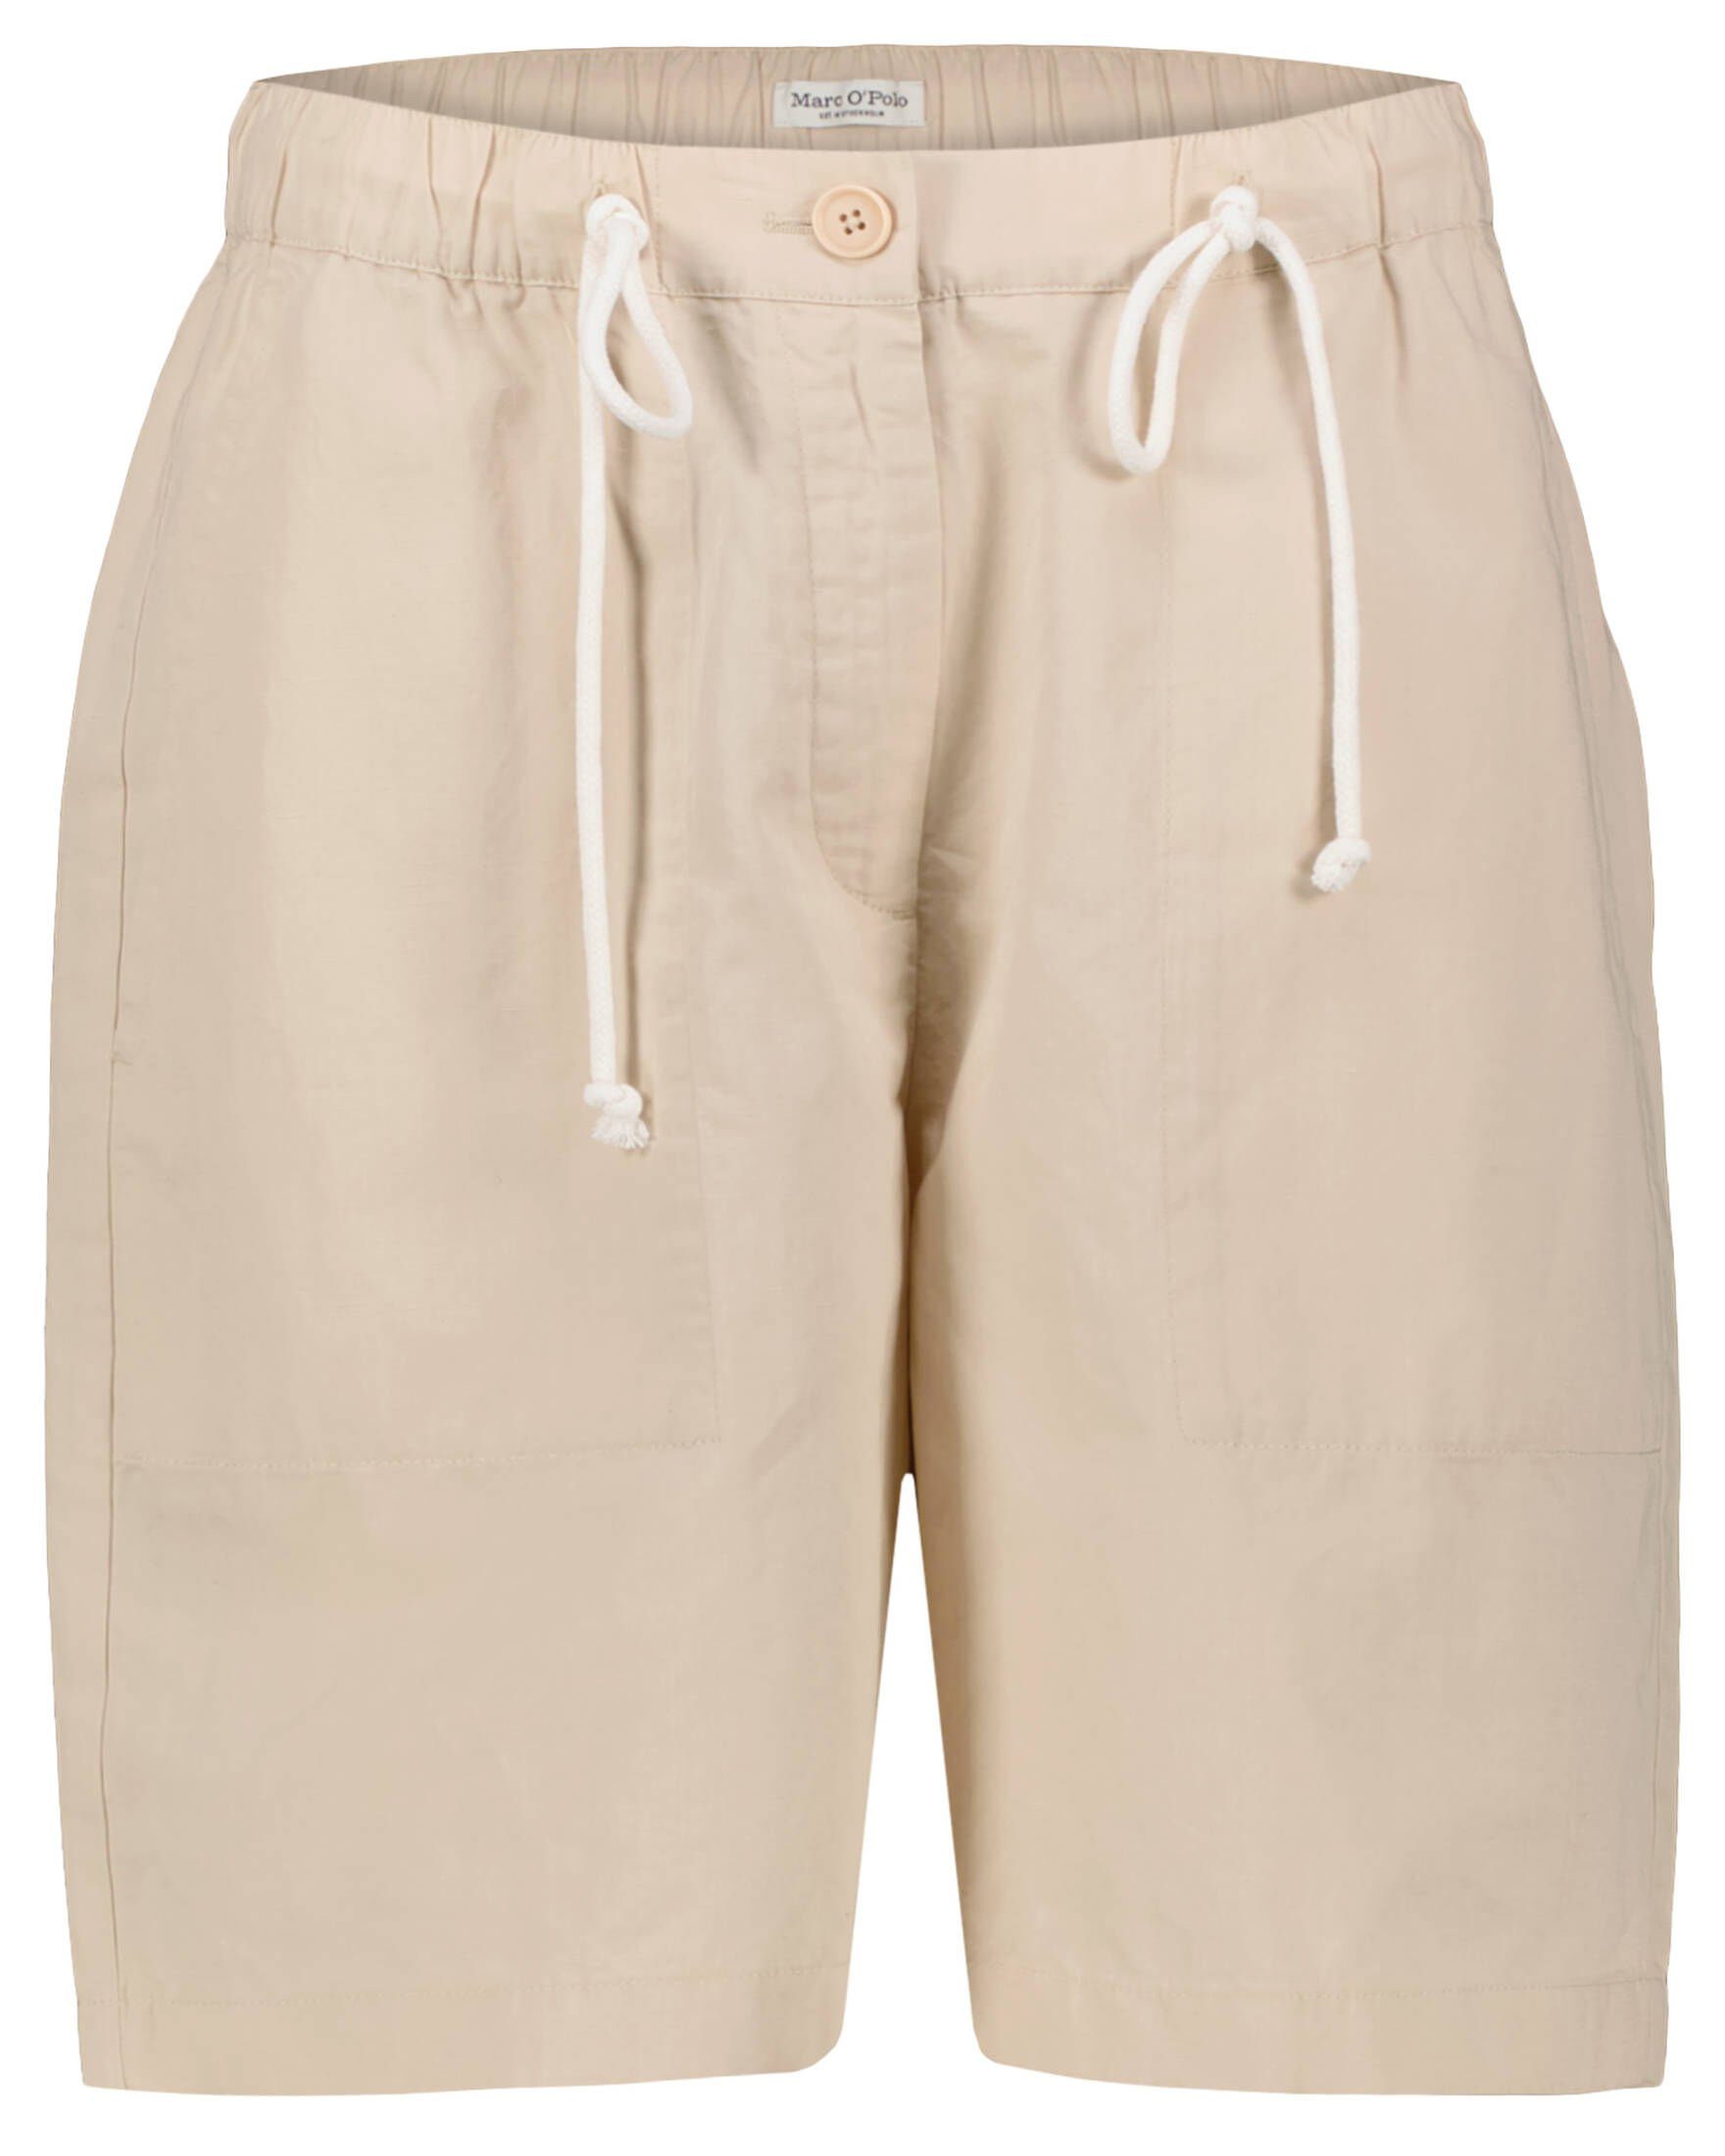 Marc O'Polo Shorts Damen Shorts Relaxed Fit (1-tlg) sand (21)